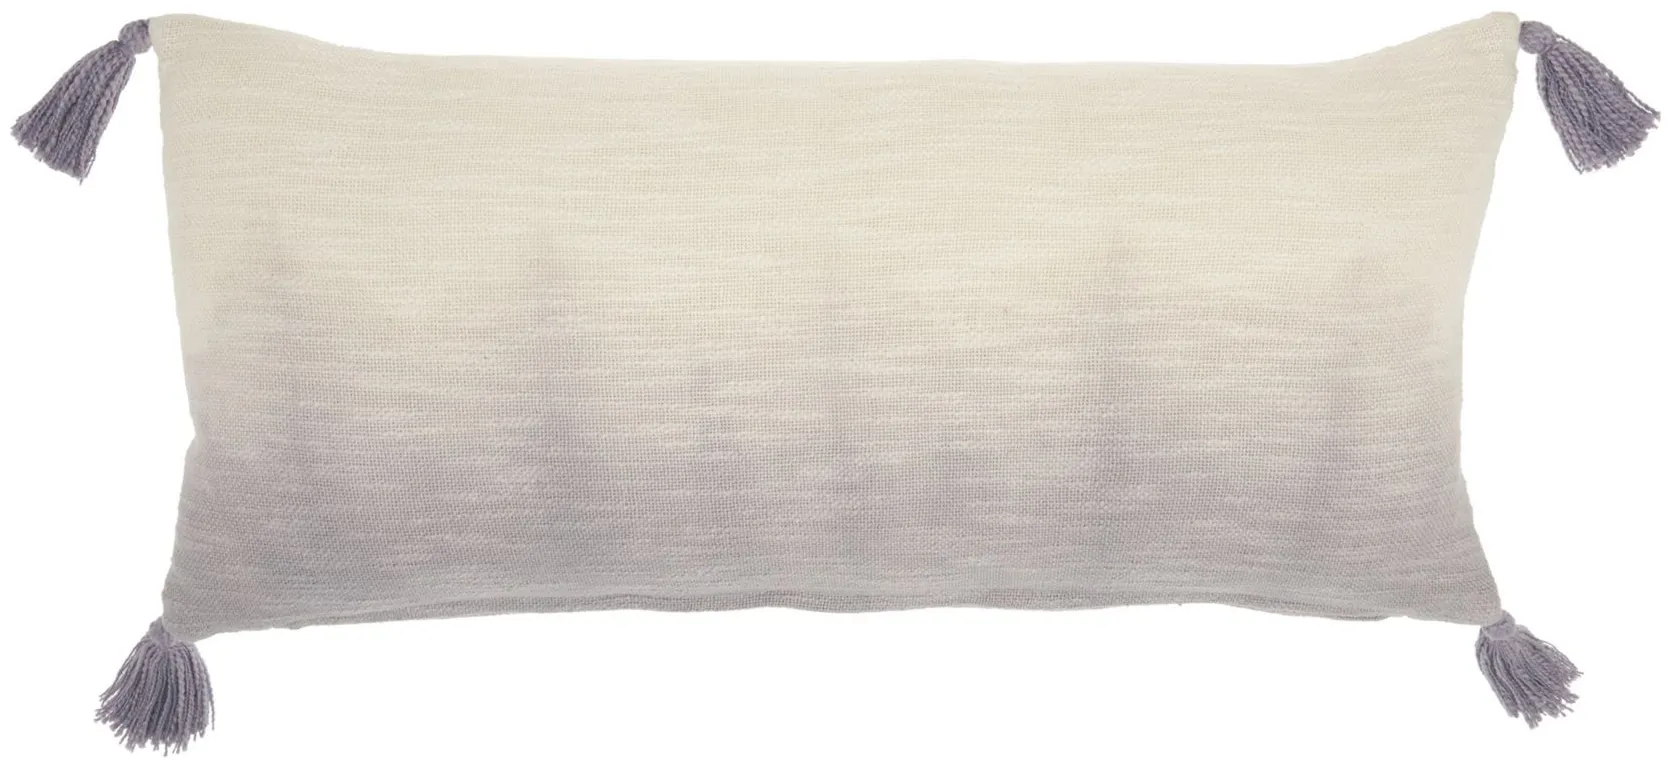 Mina Victory Ombre Gray Tassels Rectangular Throw Pillow in Gray by Nourison